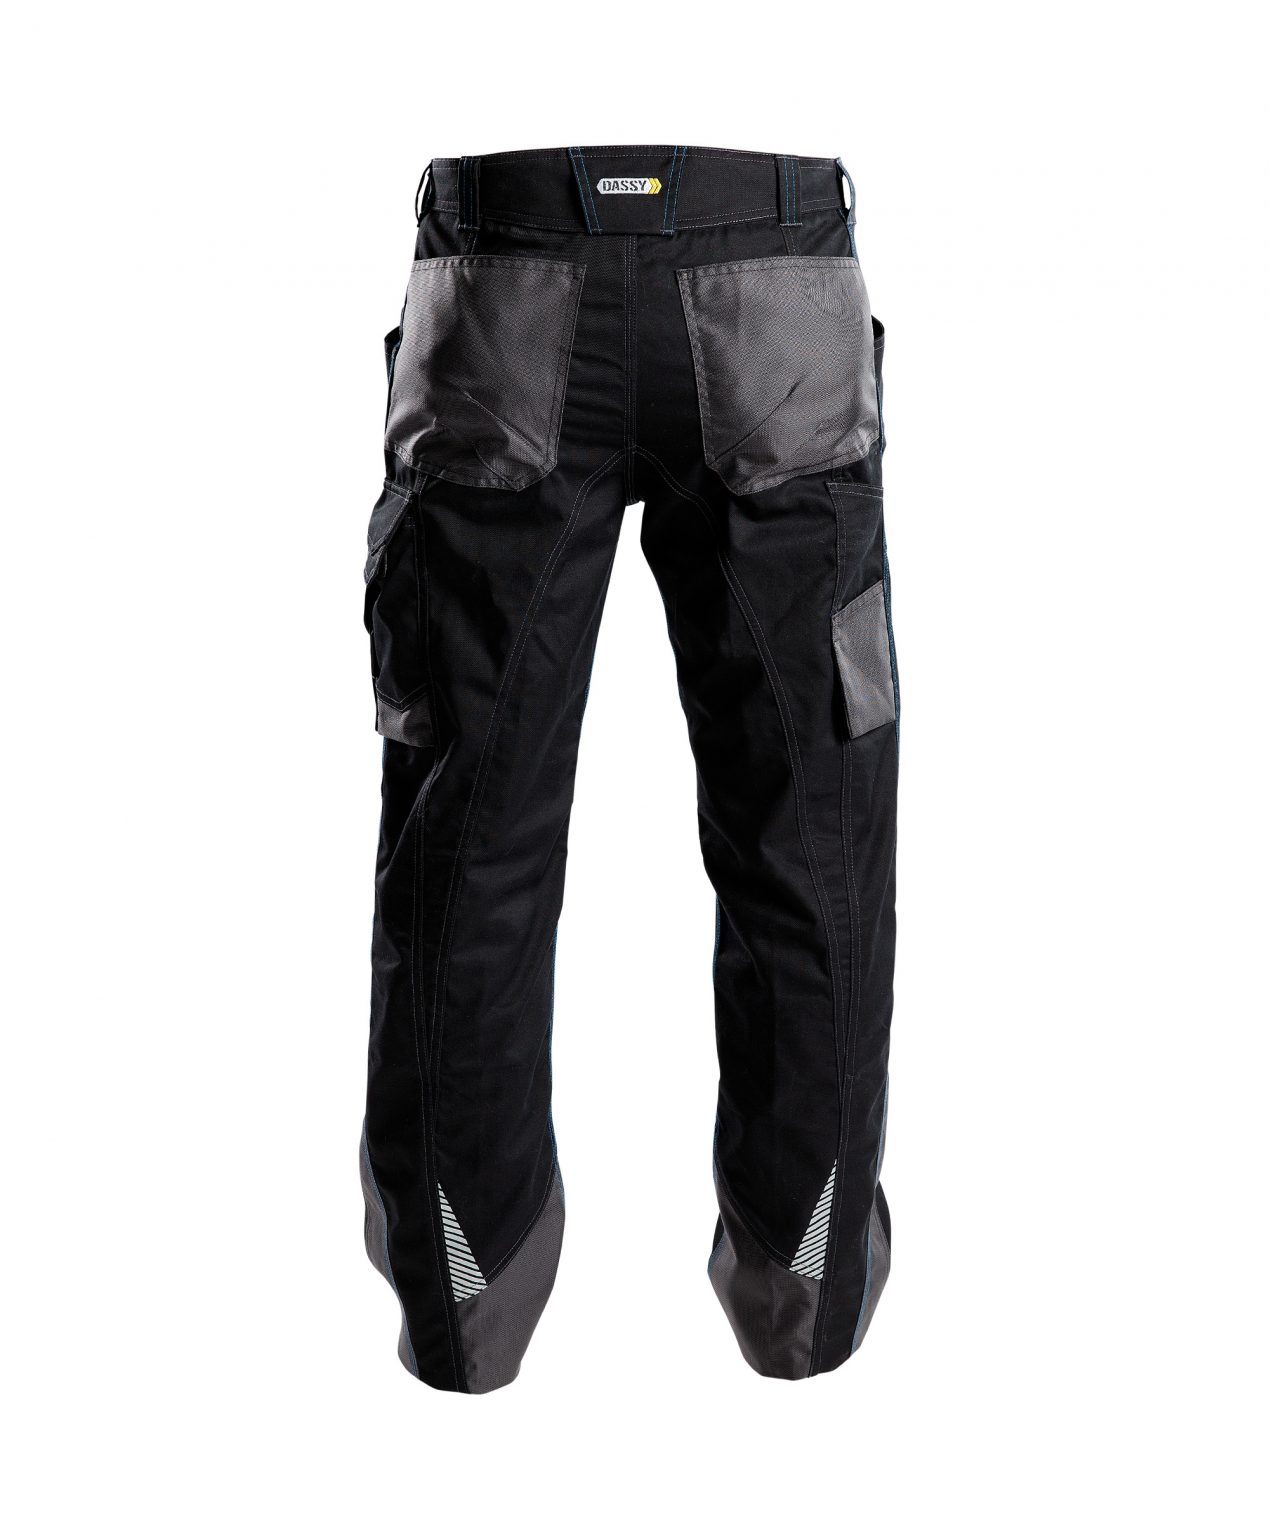 spectrum work trousers black anthracite grey back